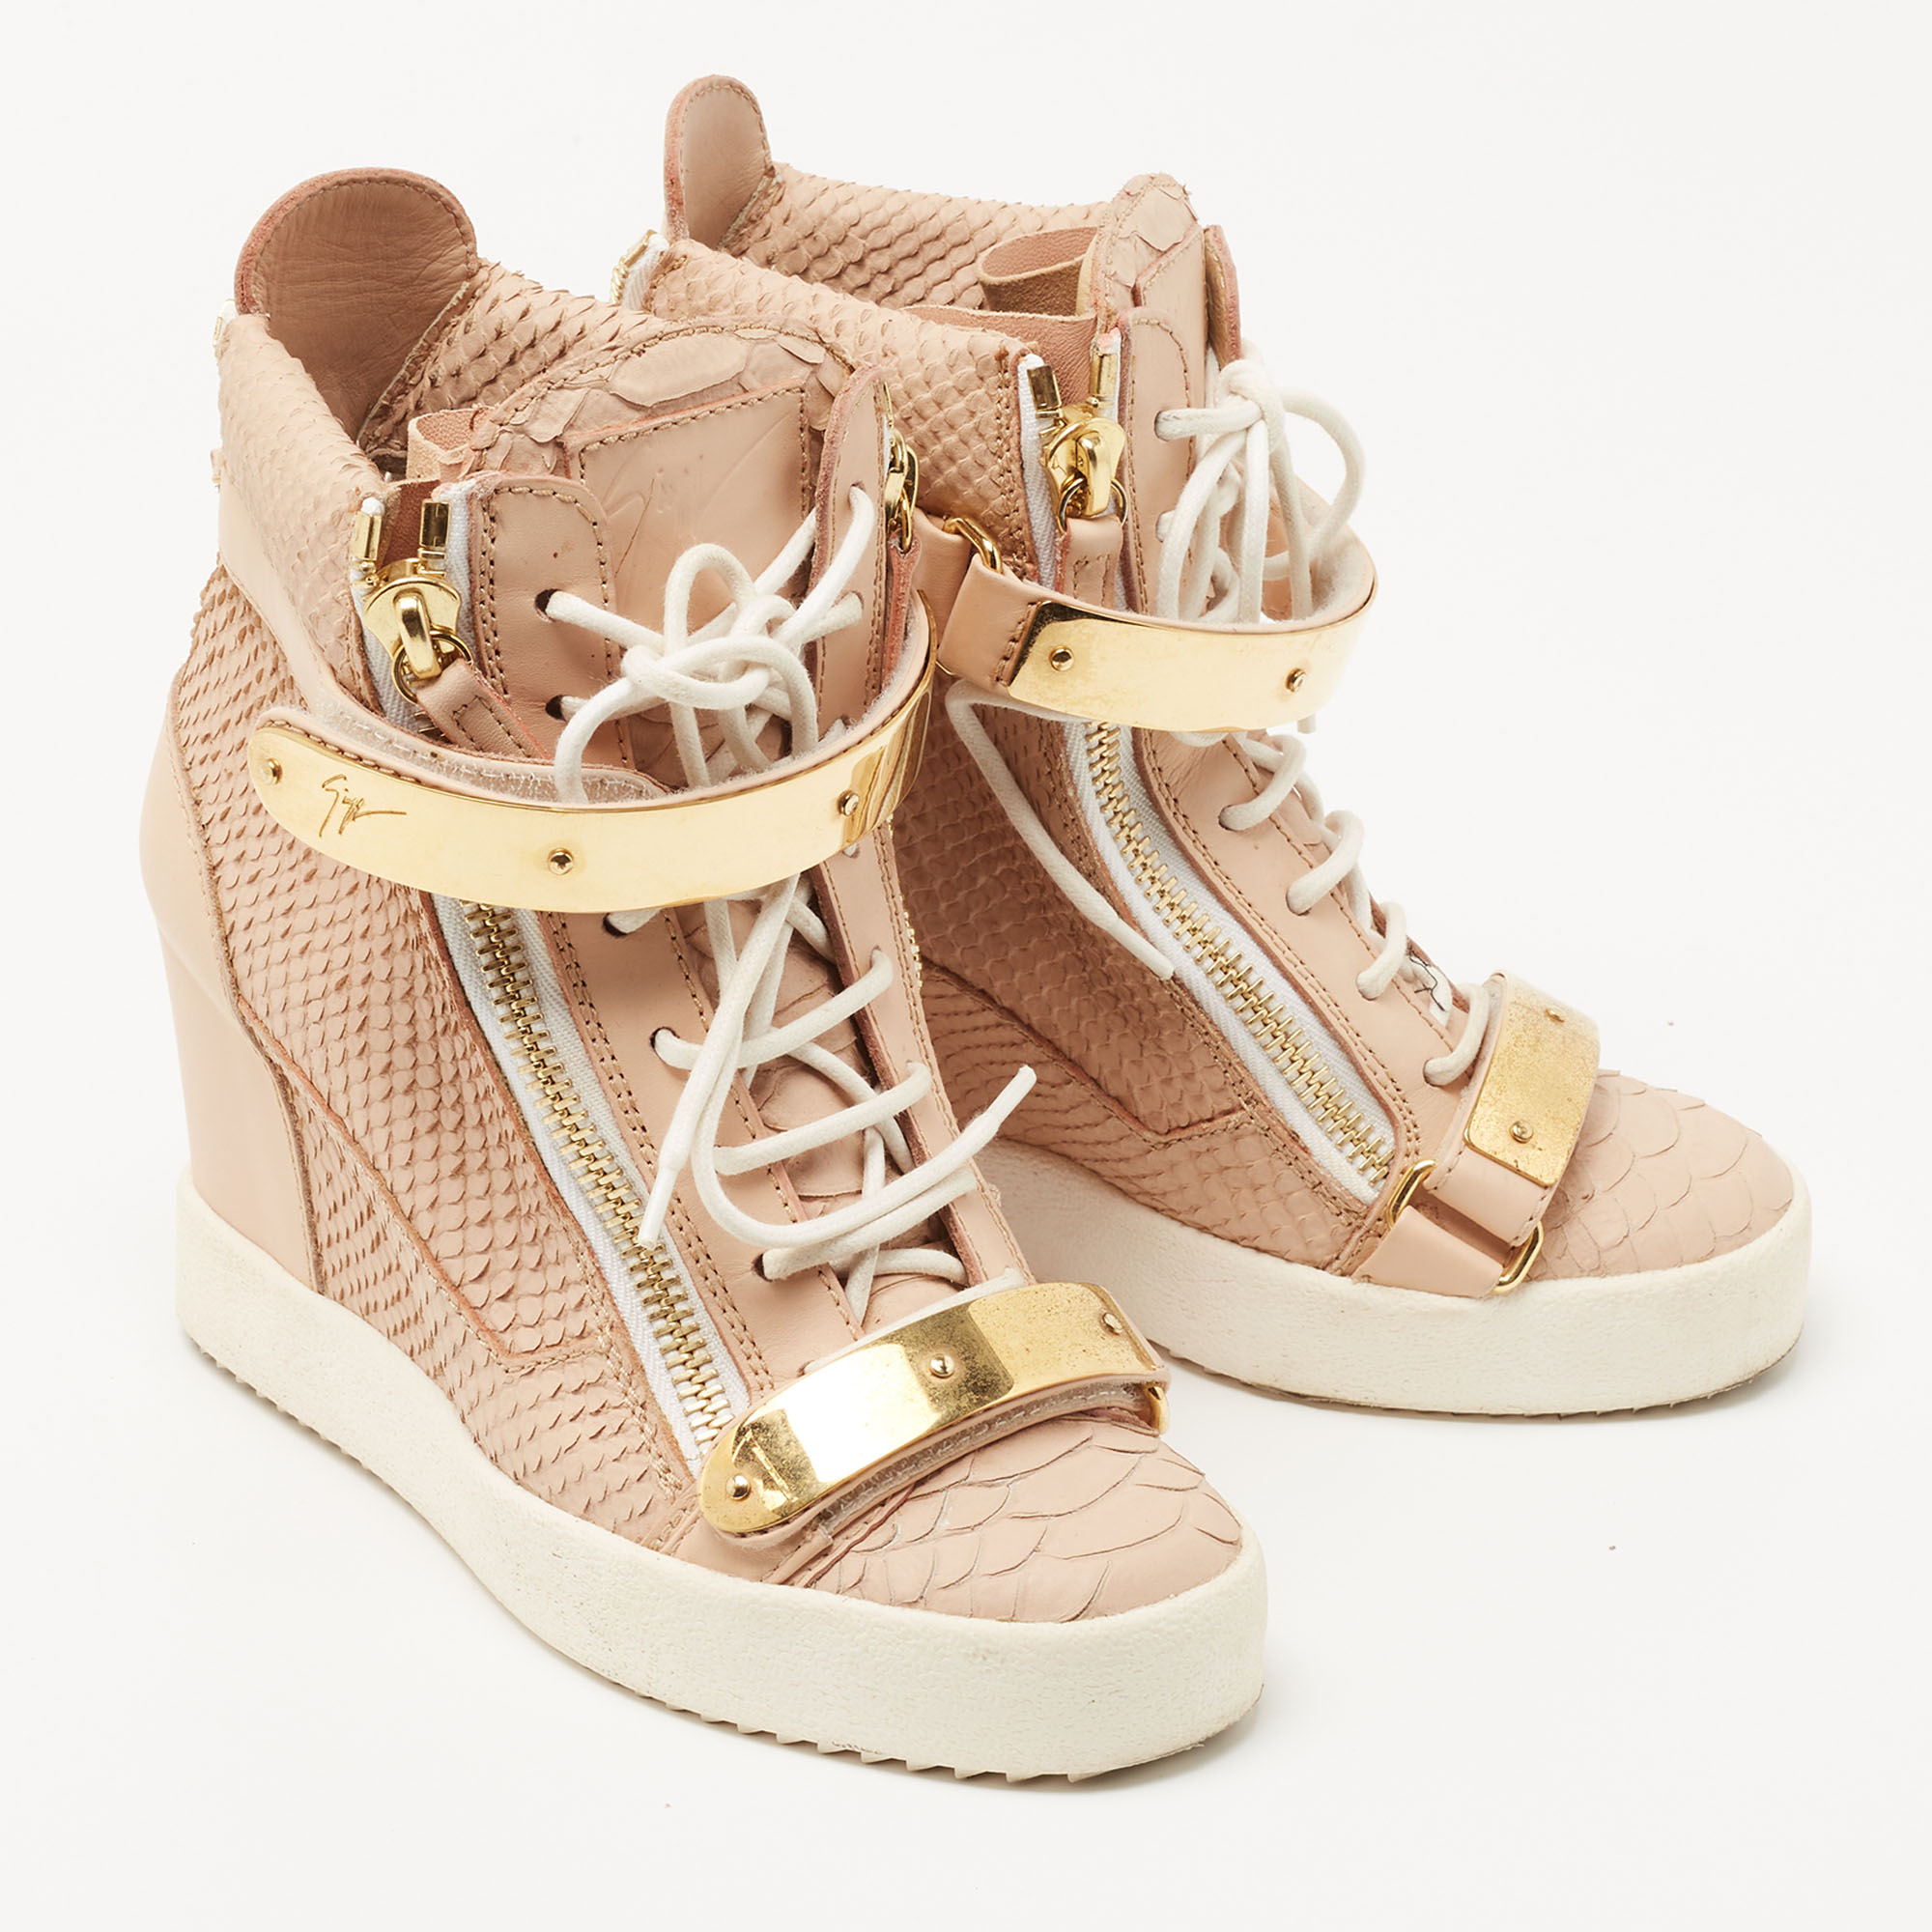 Giuseppe Zanotti Peach Pink Python Embossed Leather Coby Wedge Sneakers Size 38